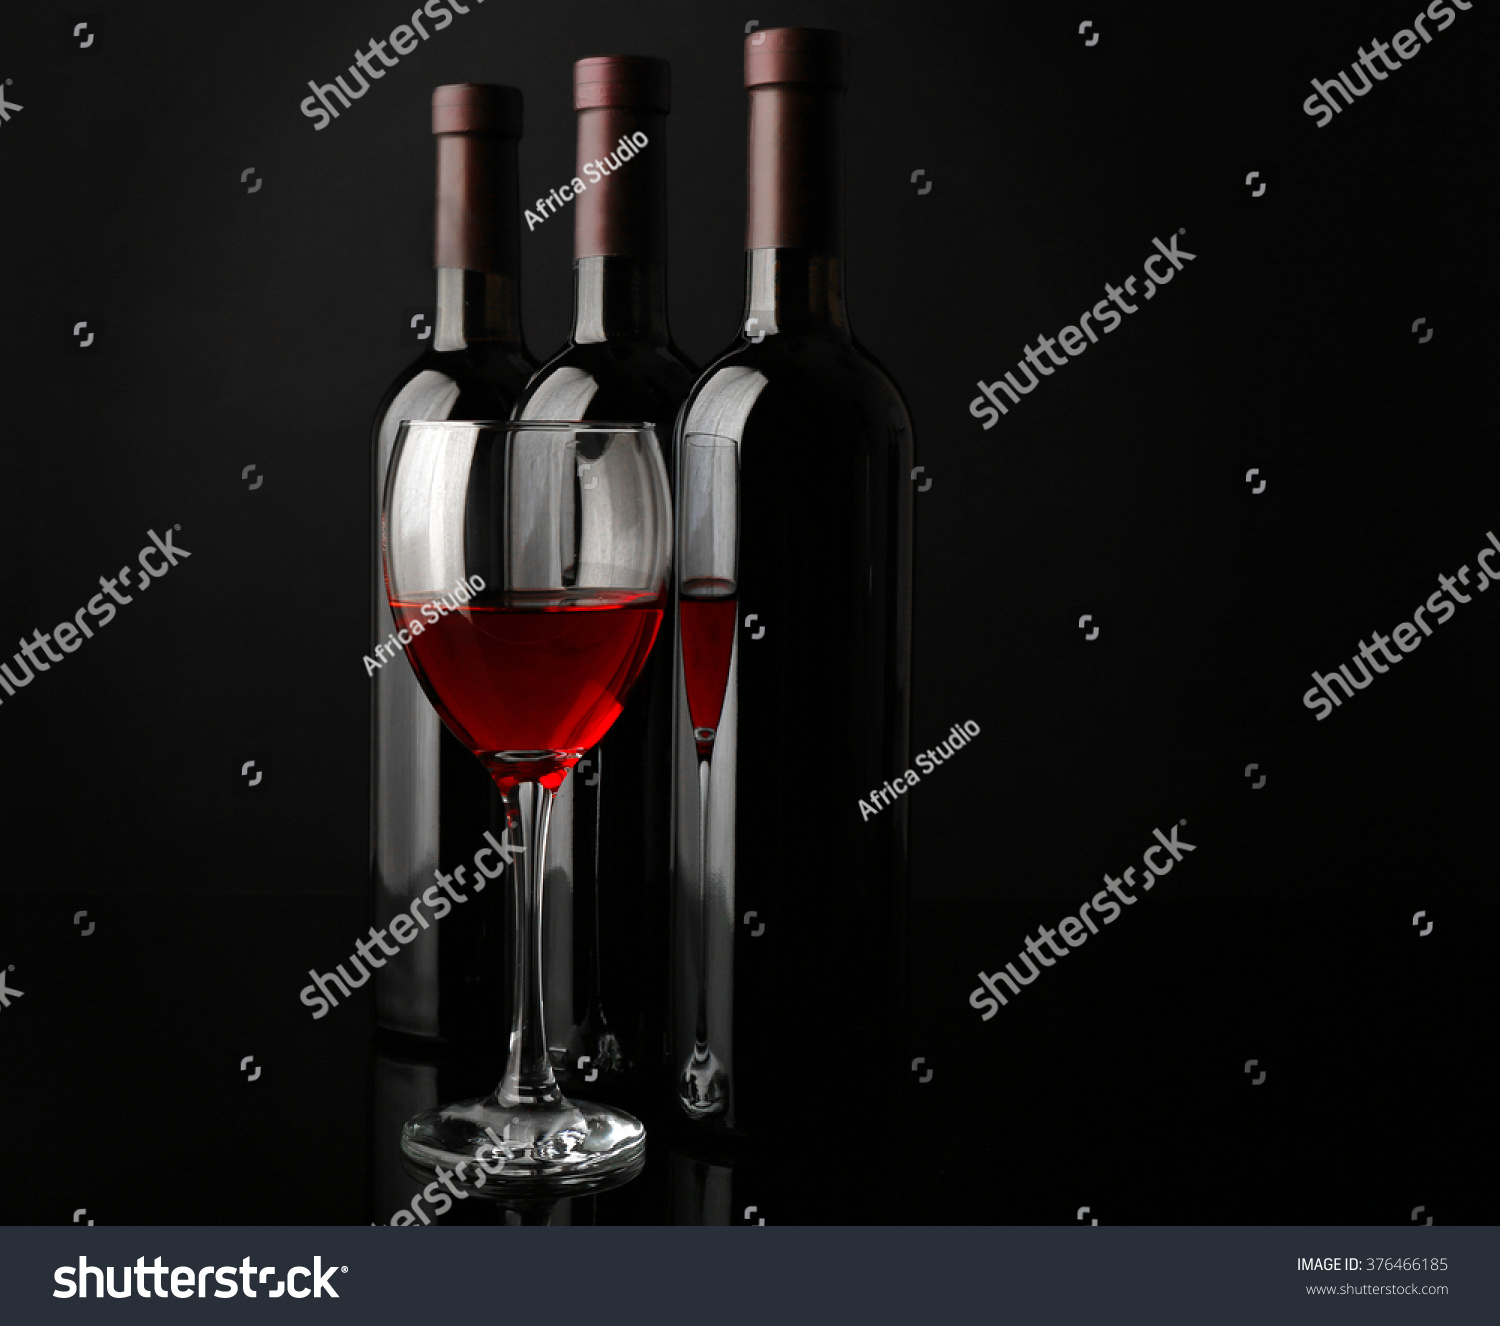 Red wine glass against bottles in a row on black background, close up #376466185